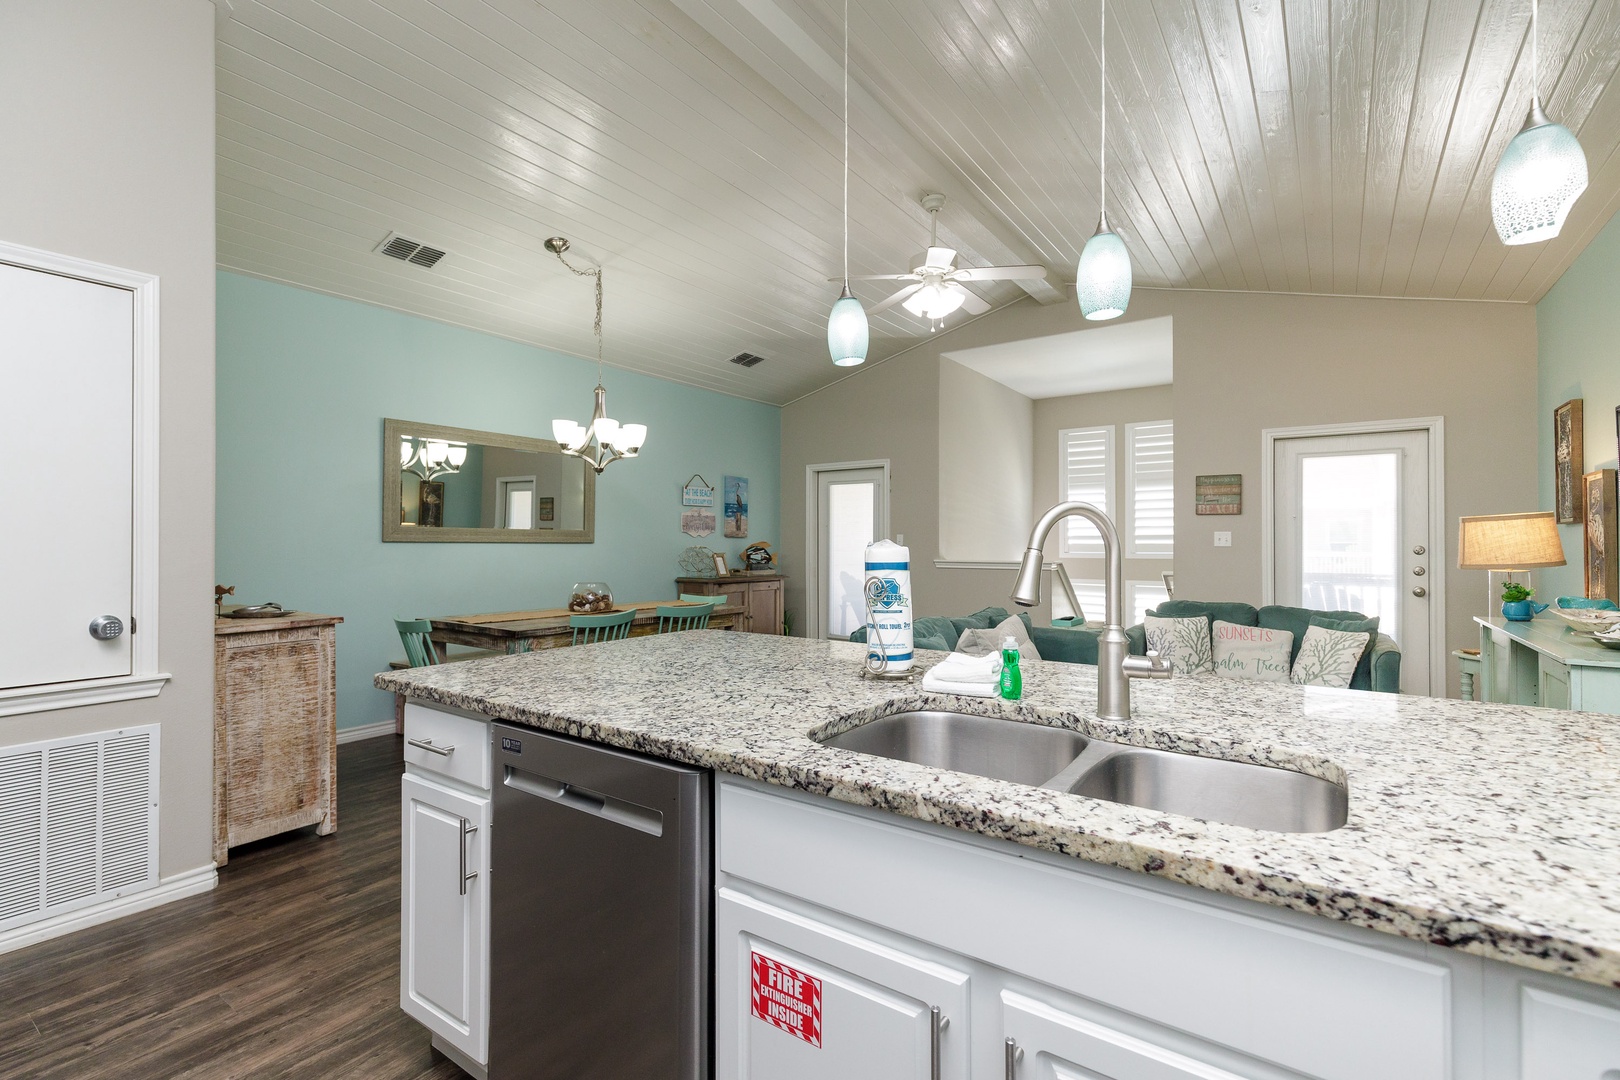 The beachy kitchen offers ample space & all the comforts of home